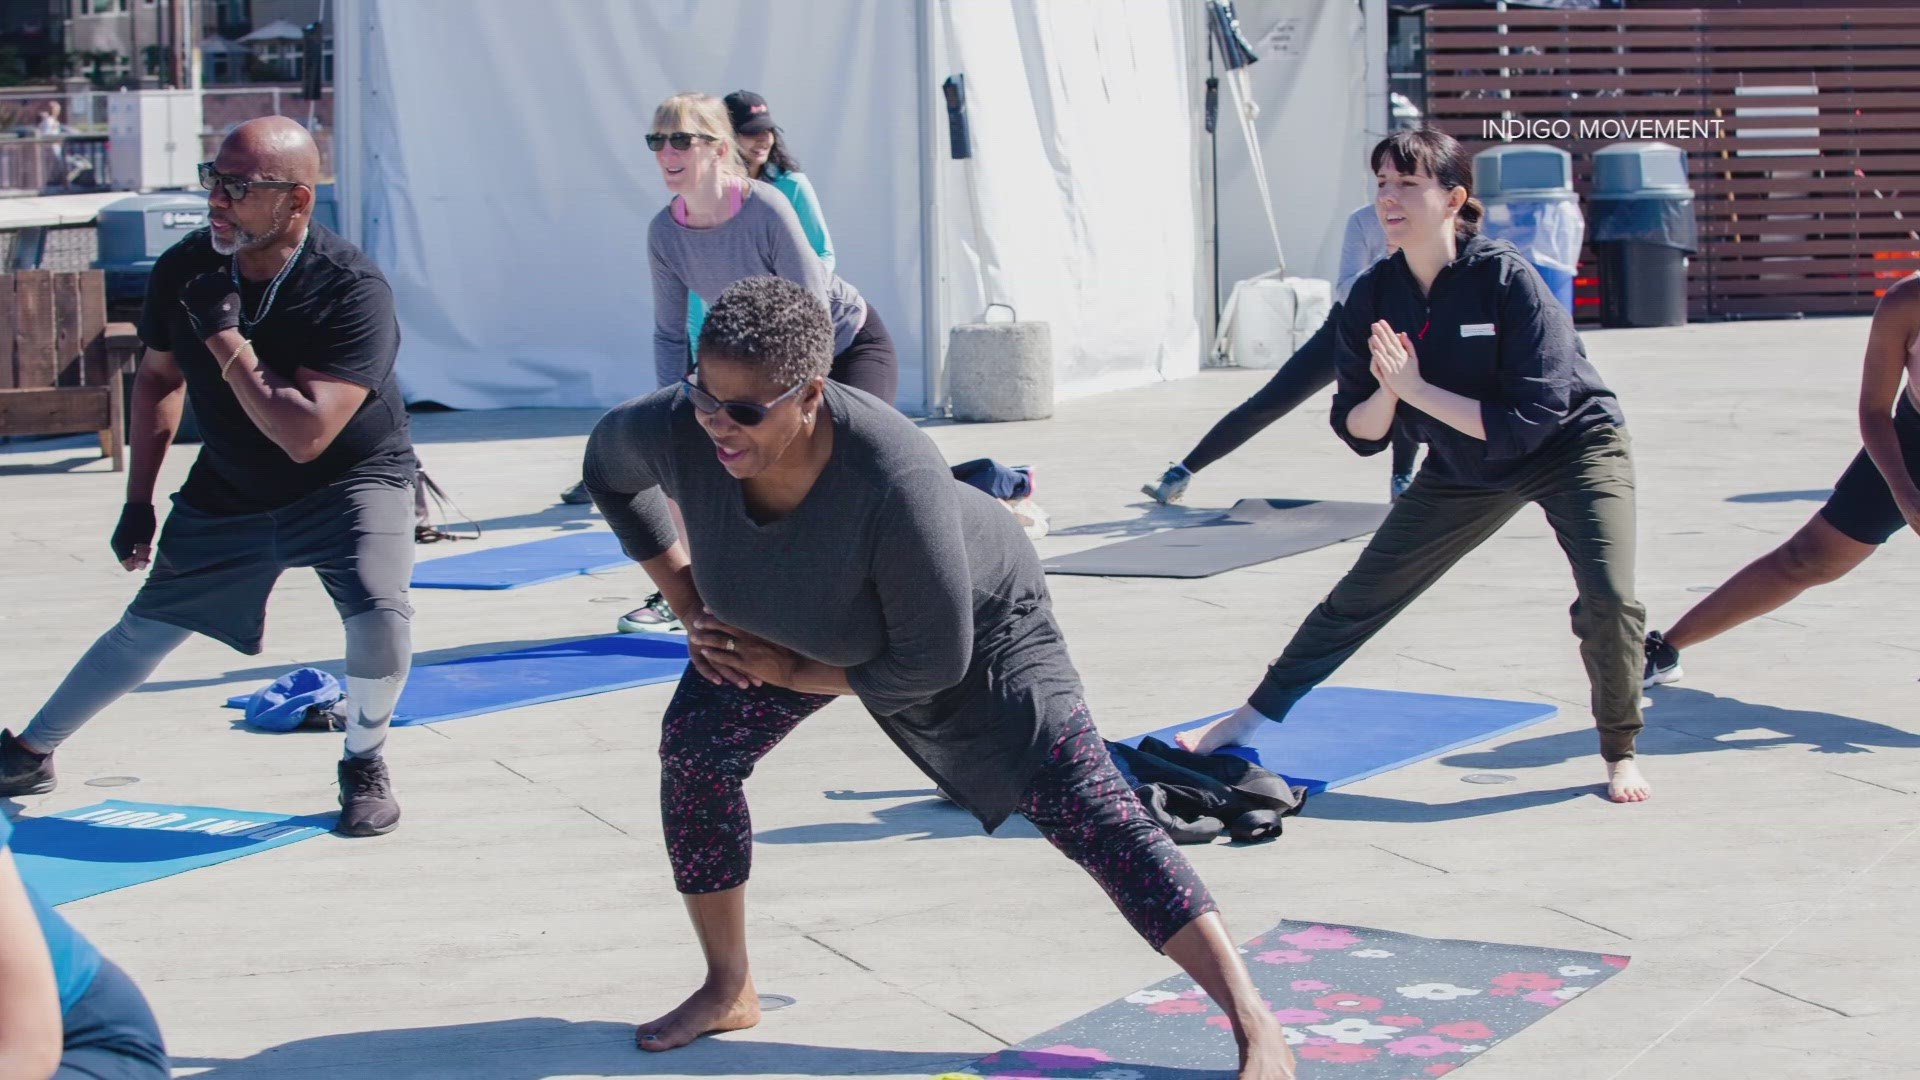 "We all deserve to be treated equally and fairly across the board.” Tiana Duncan, Indigo Movement founder, advocates for LGBTQAI+ rights through fitness community.